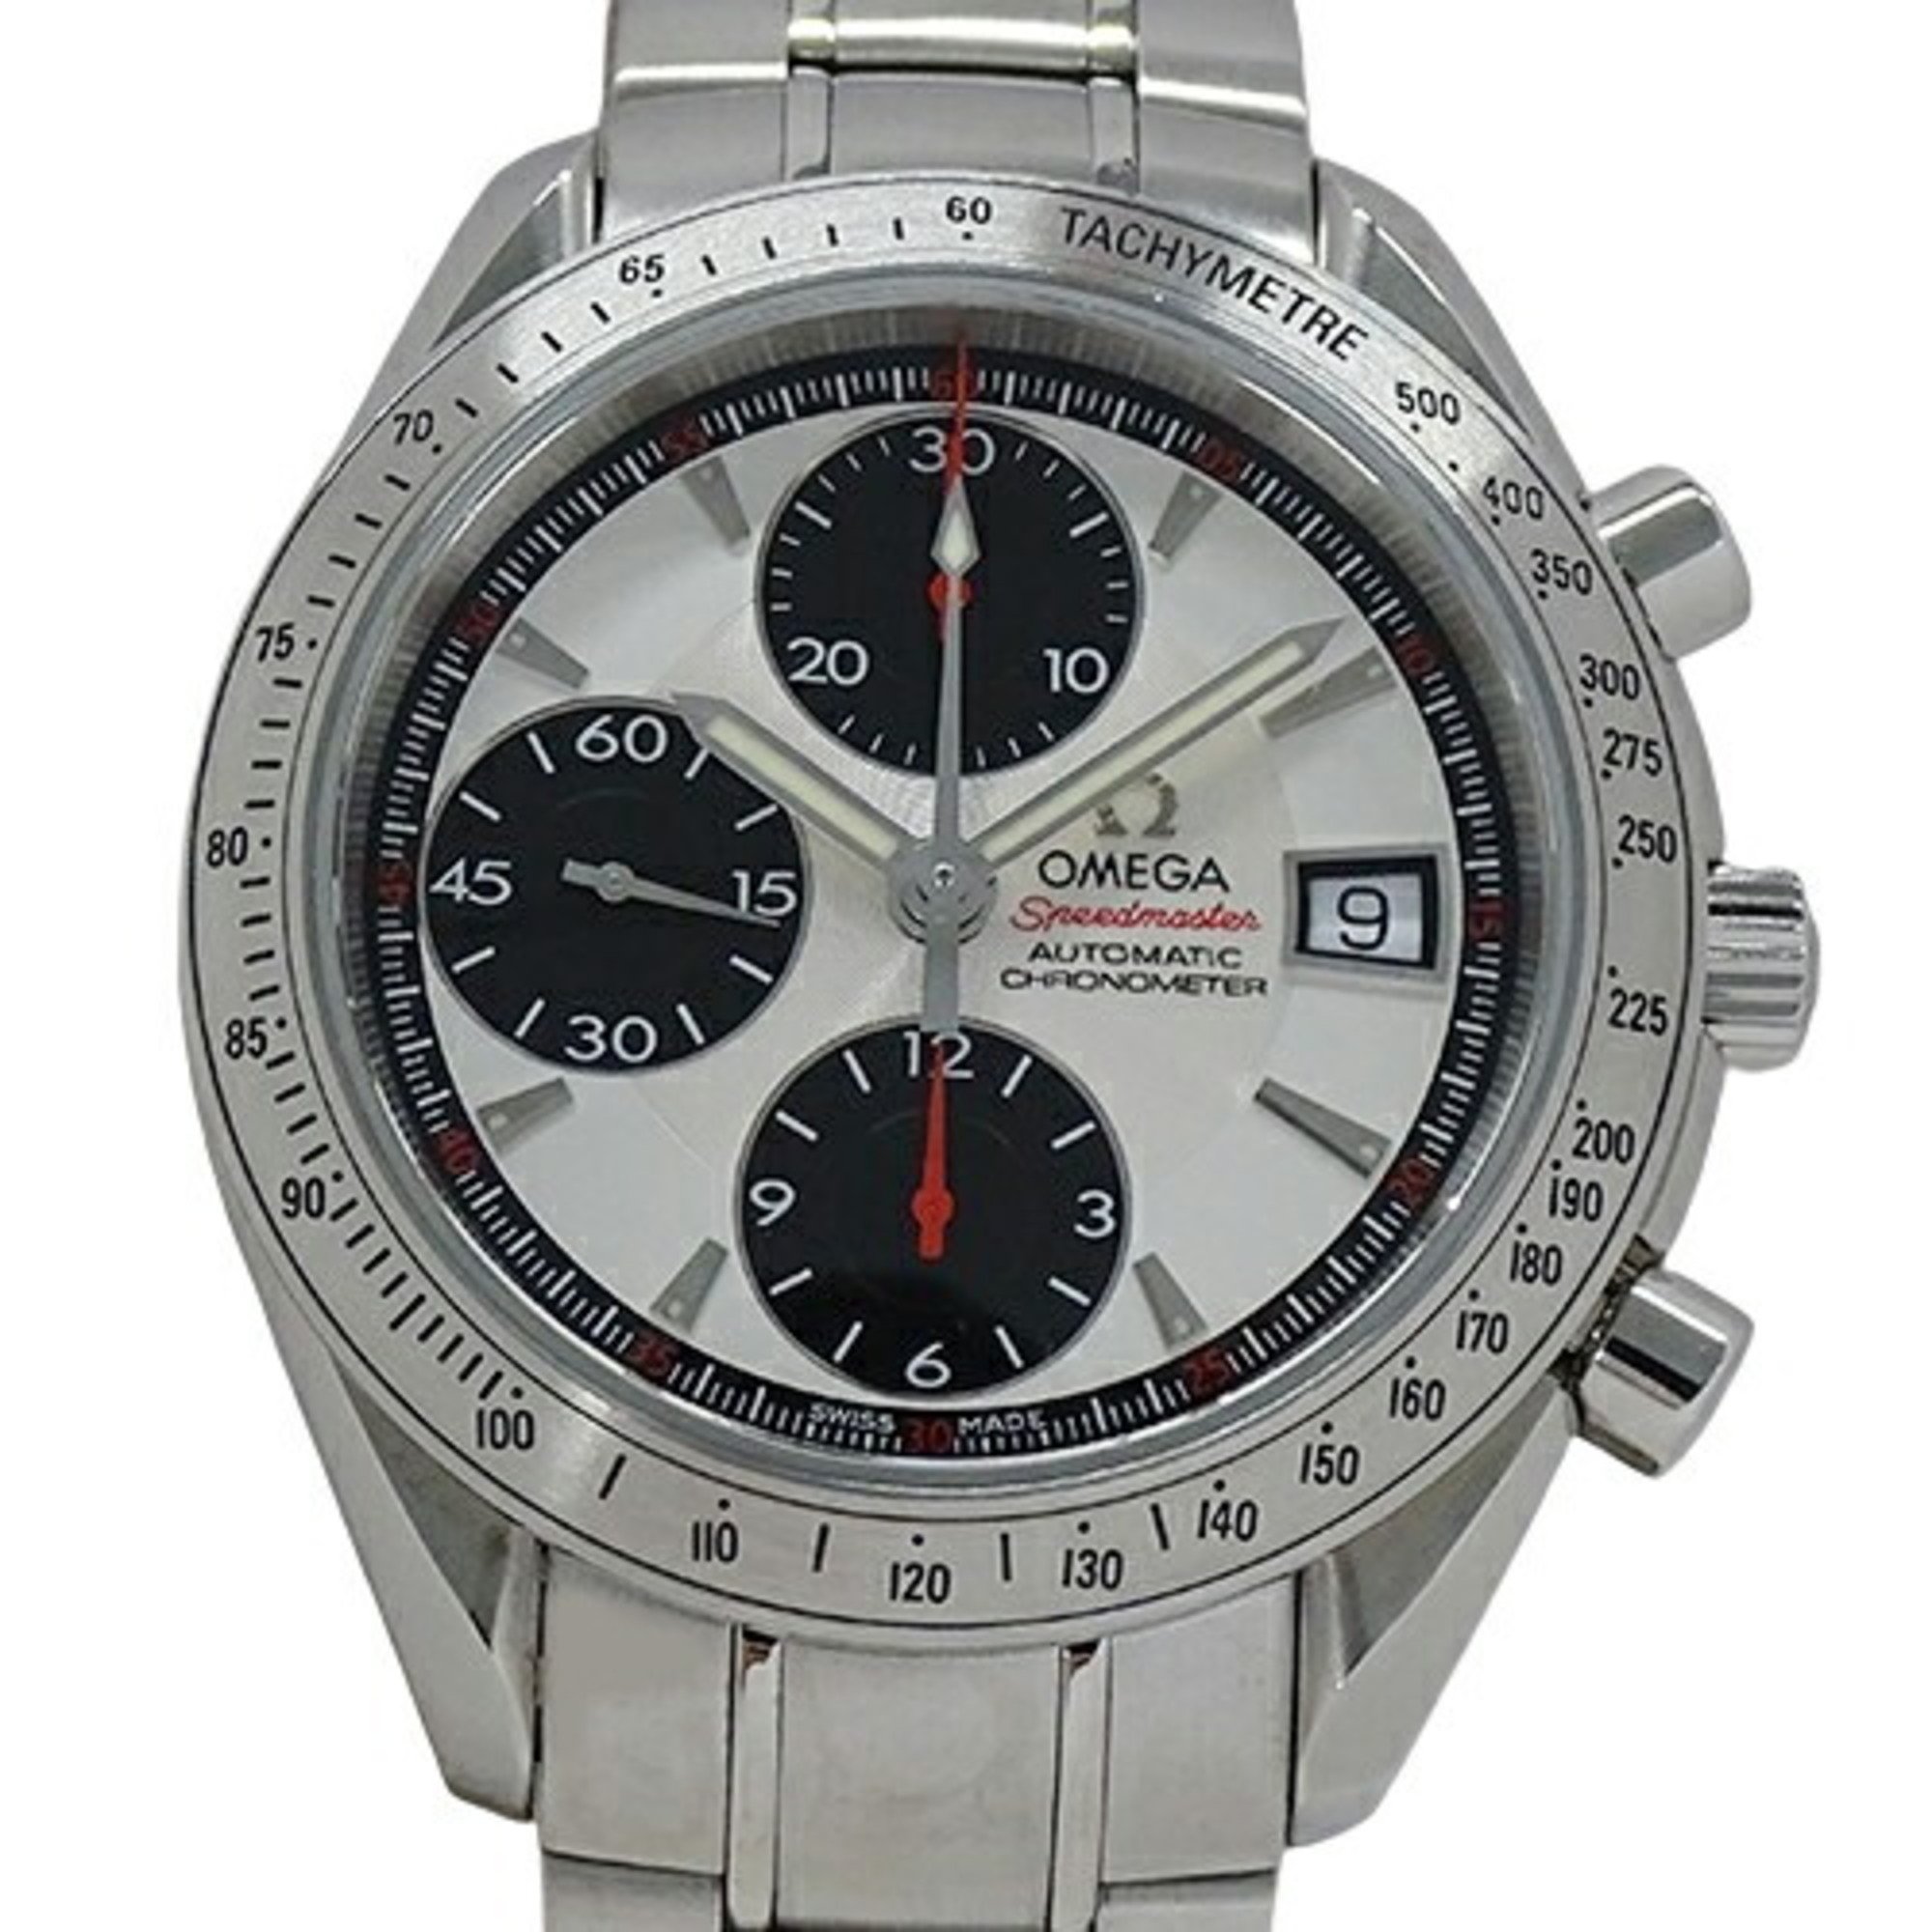 OMEGA Speedmaster 3211.31 Watch Men's Date Chronometer Automatic AT Stainless Steel SS Silver Polished